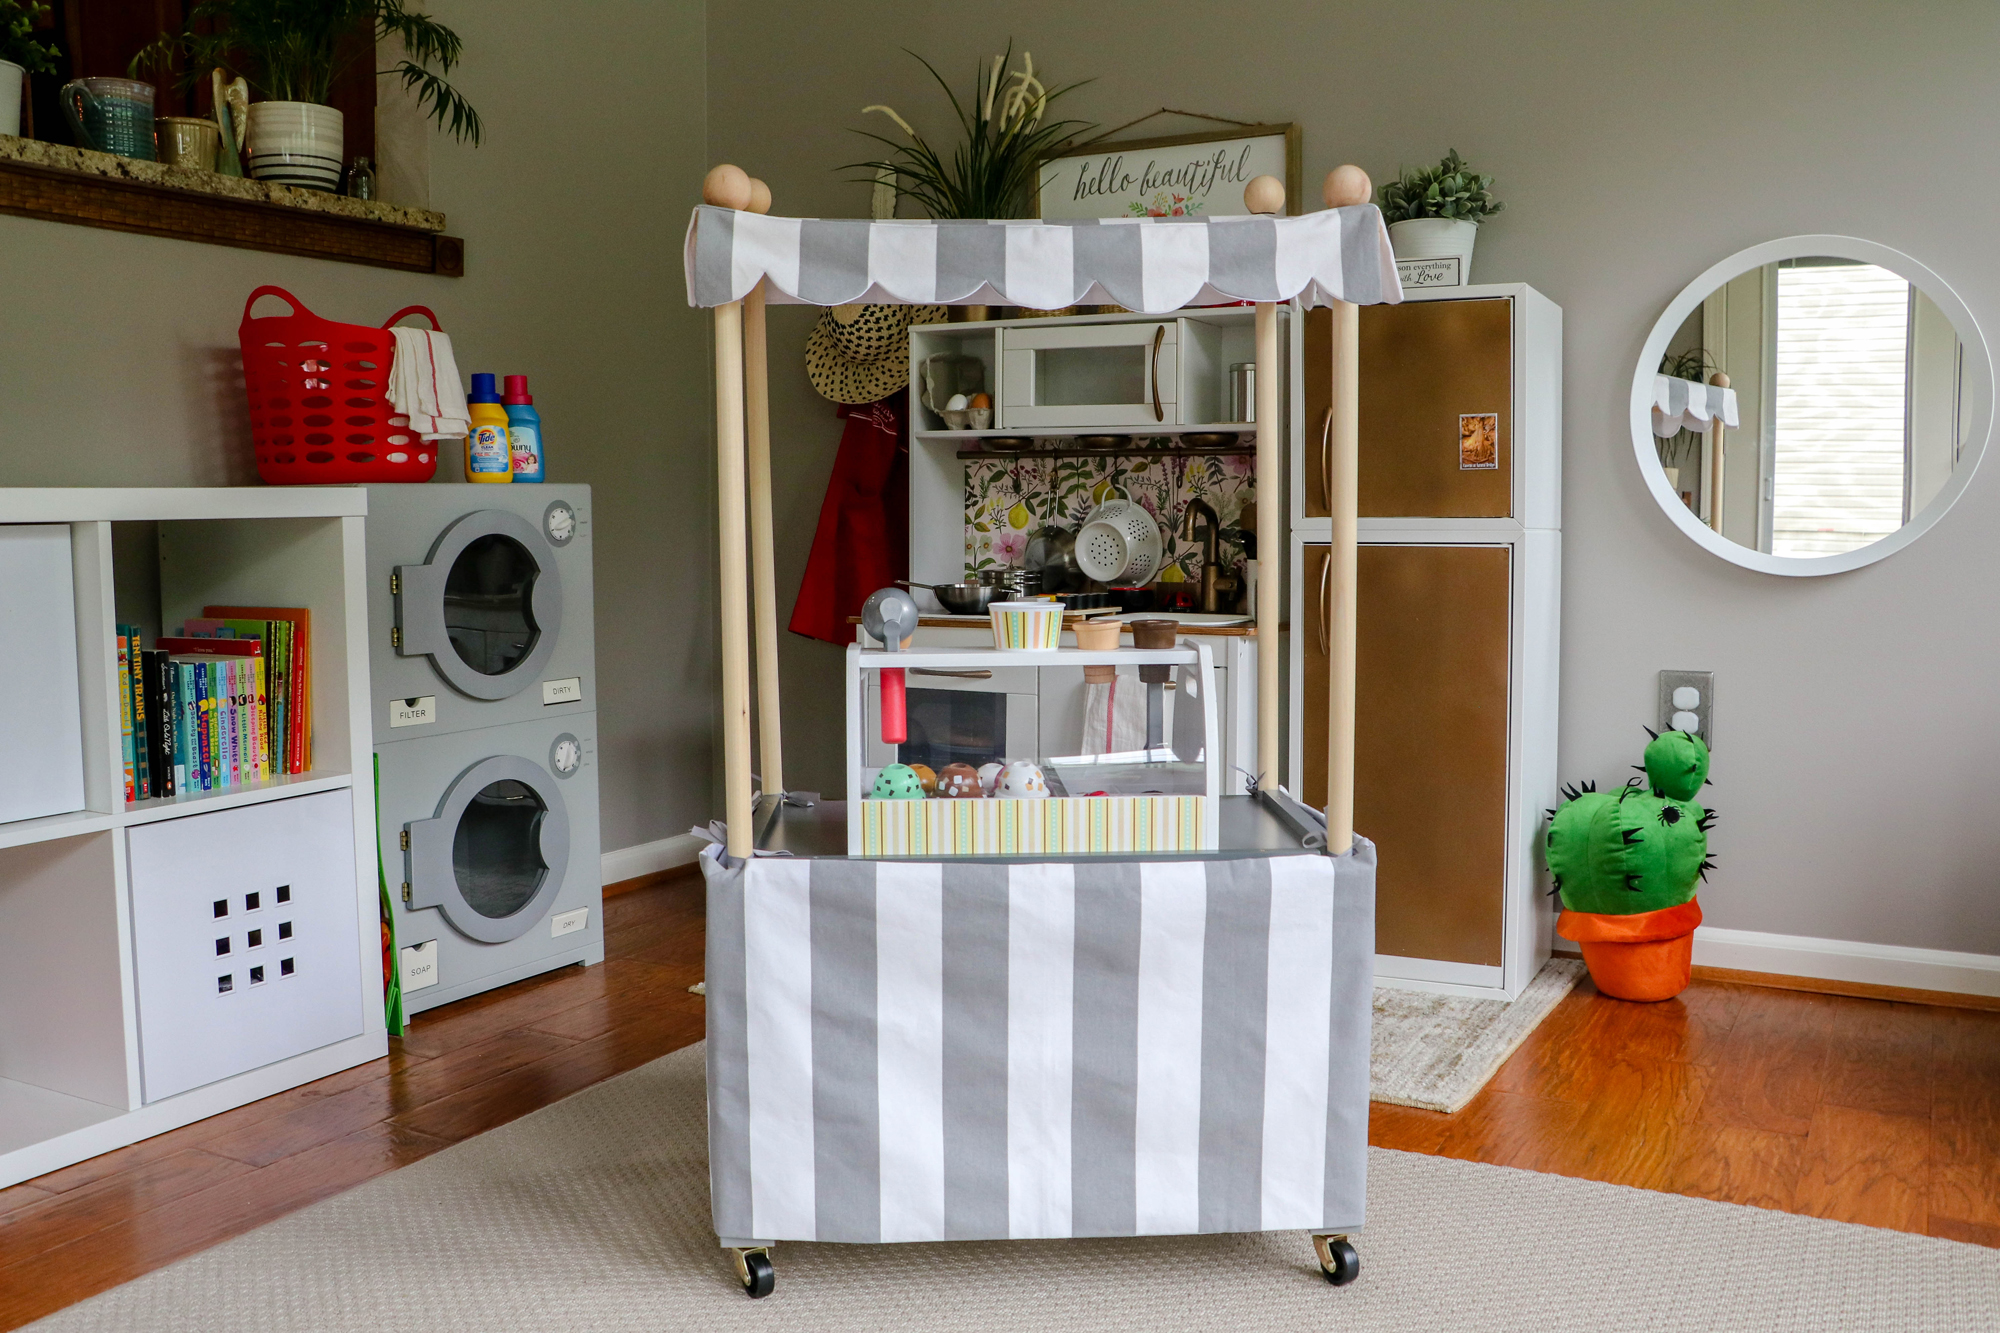 IKEA Hack: LACK Converted to Children's Role Play Vendor Cart